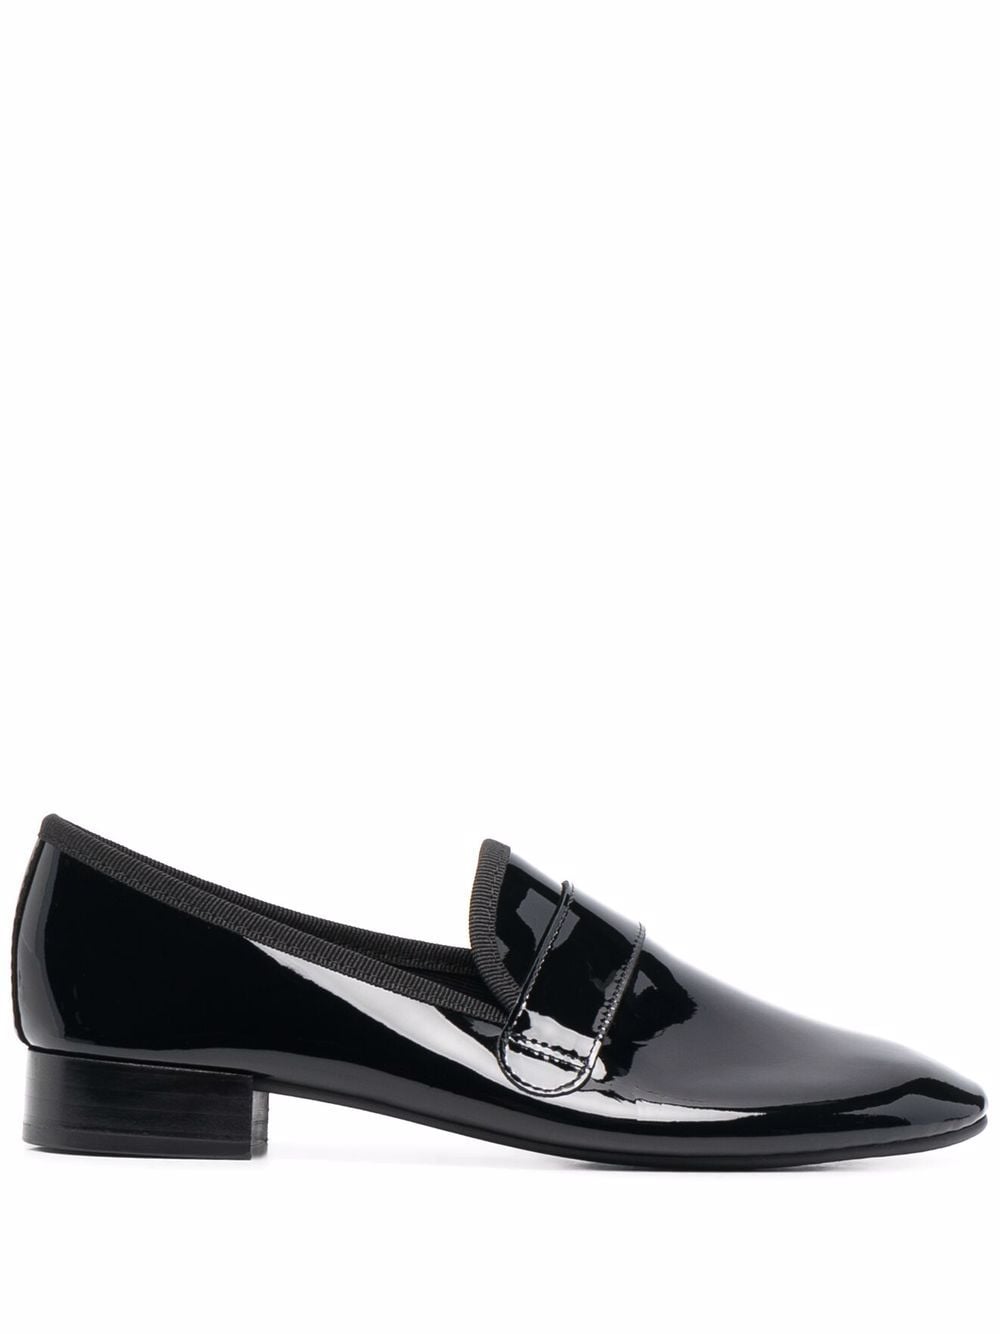 Image 1 of Repetto Michael 20mm loafers